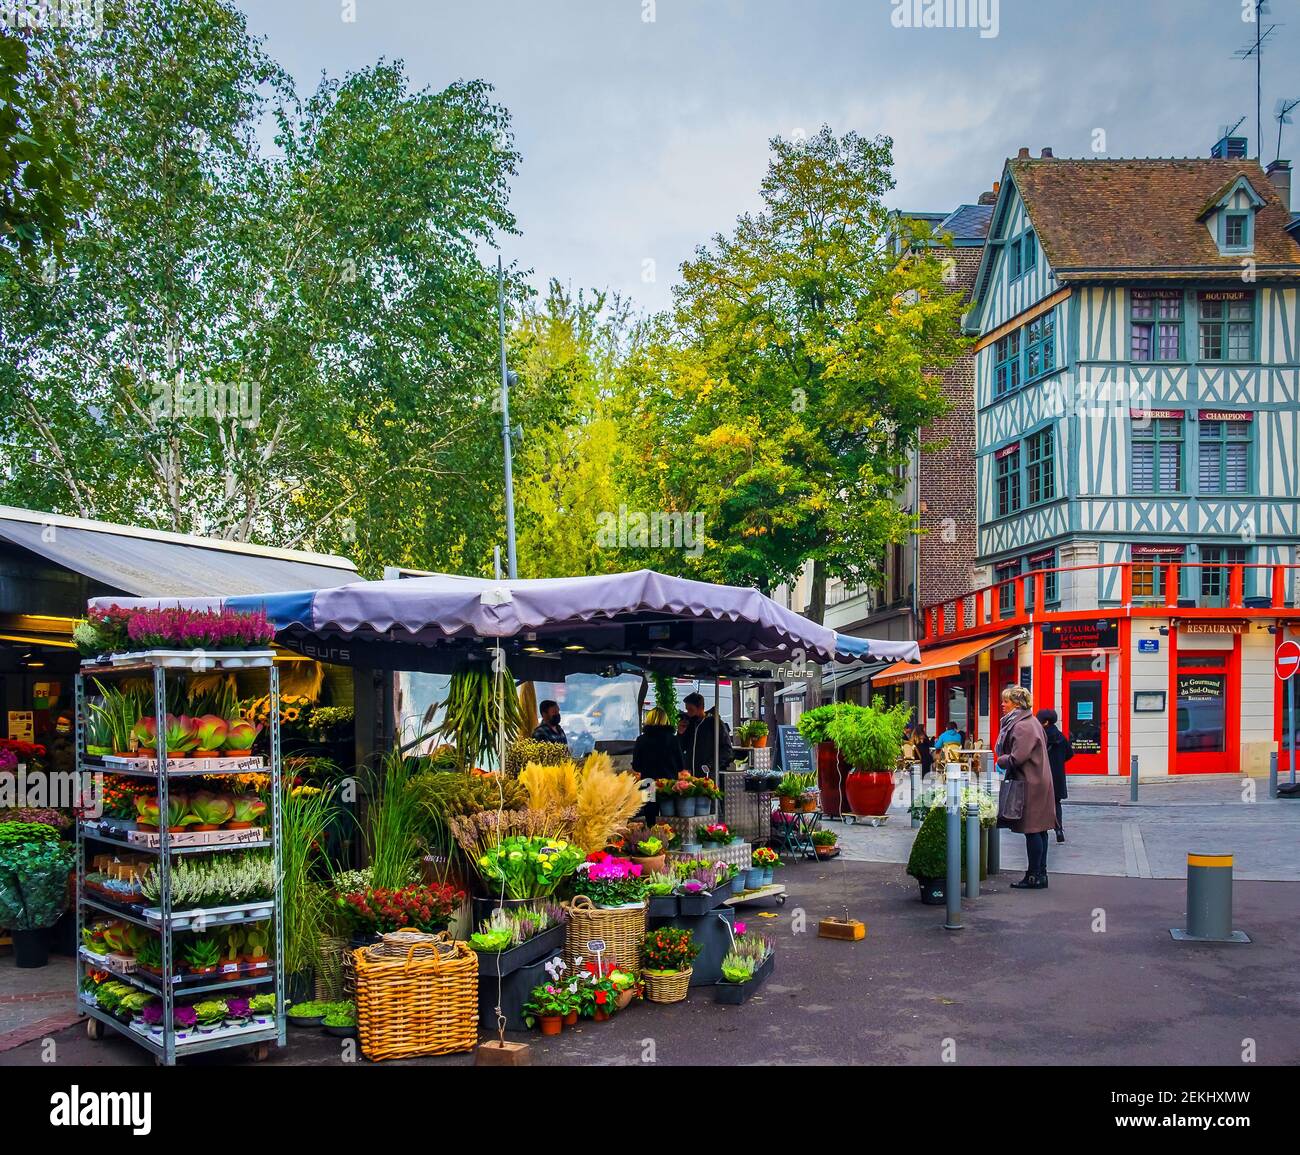 Rouen, France, Oct 2020, view of a flower stall at the 'Place du vieux marché ' in the old part of the city Stock Photo